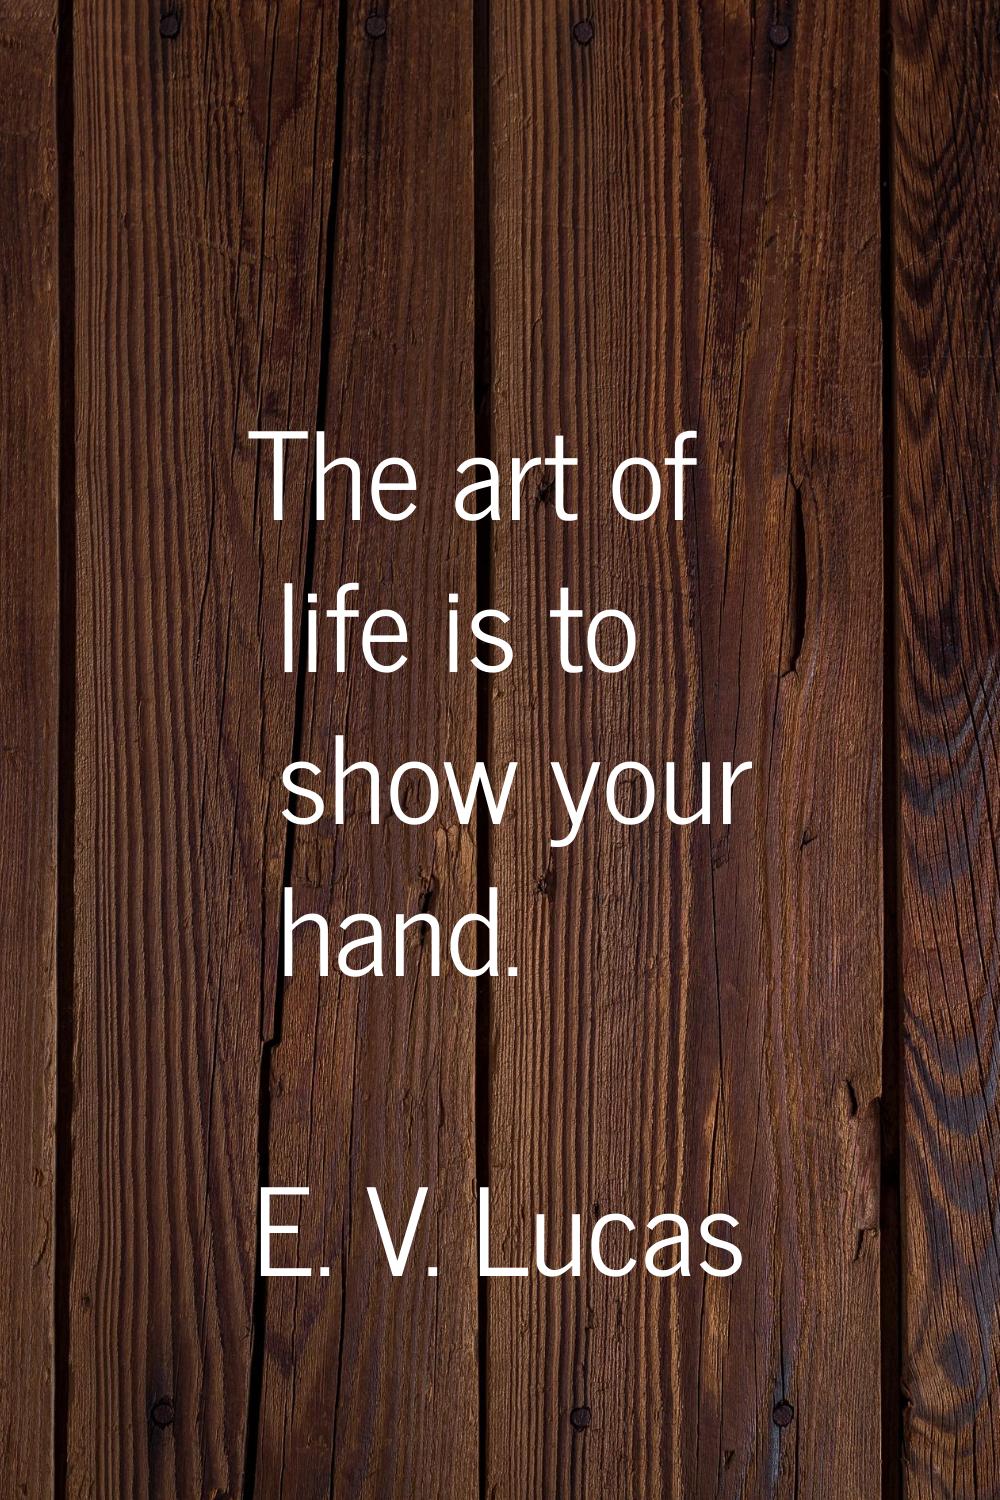 The art of life is to show your hand.